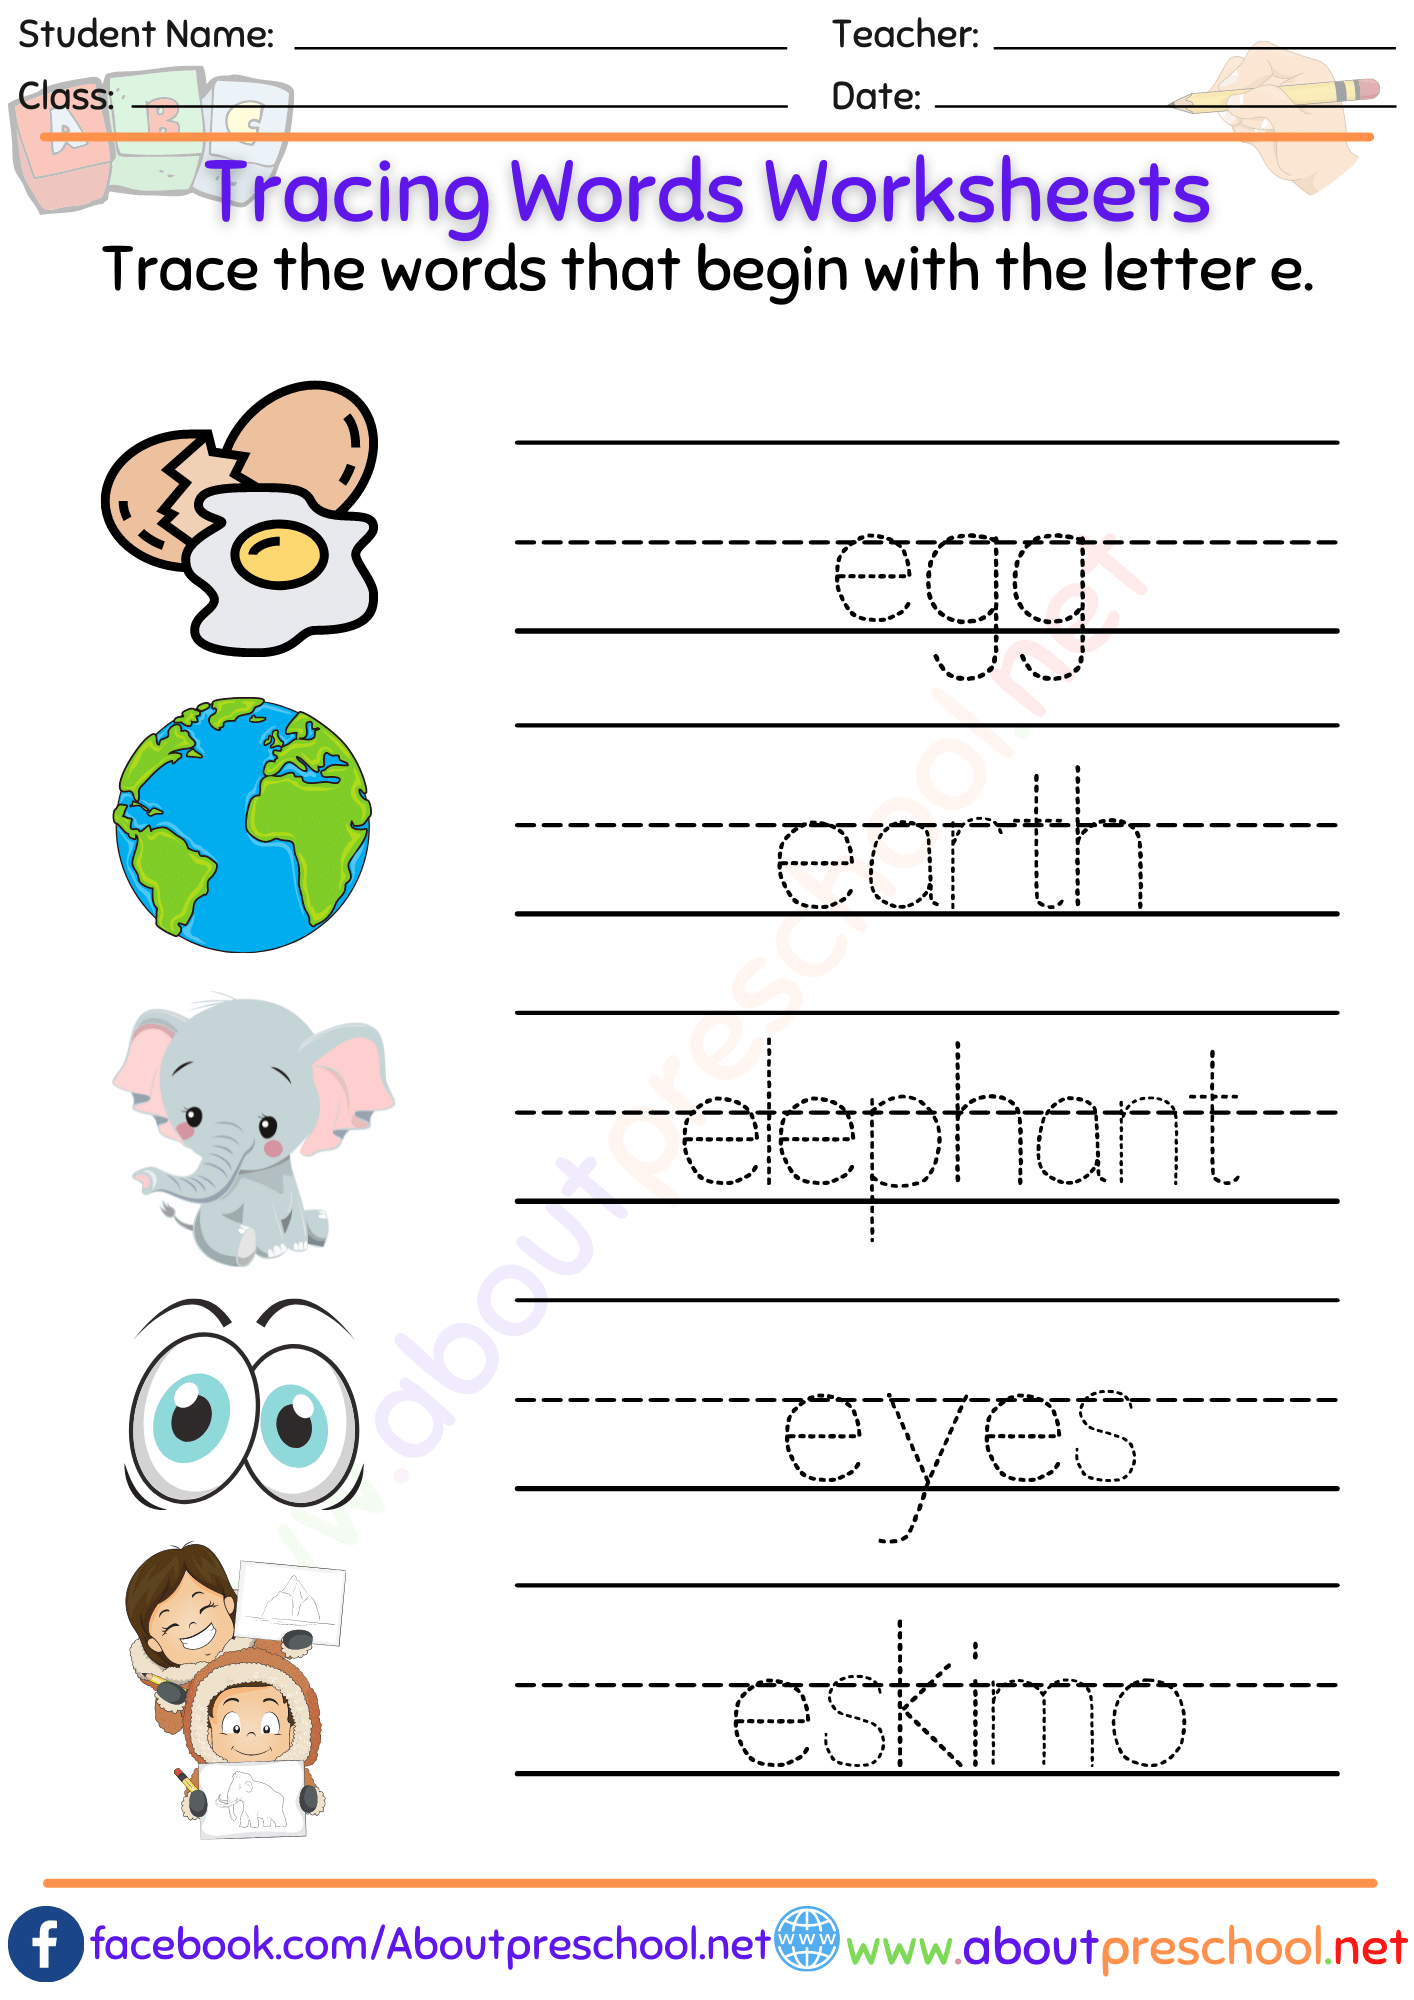 Tracing Words Worksheets e